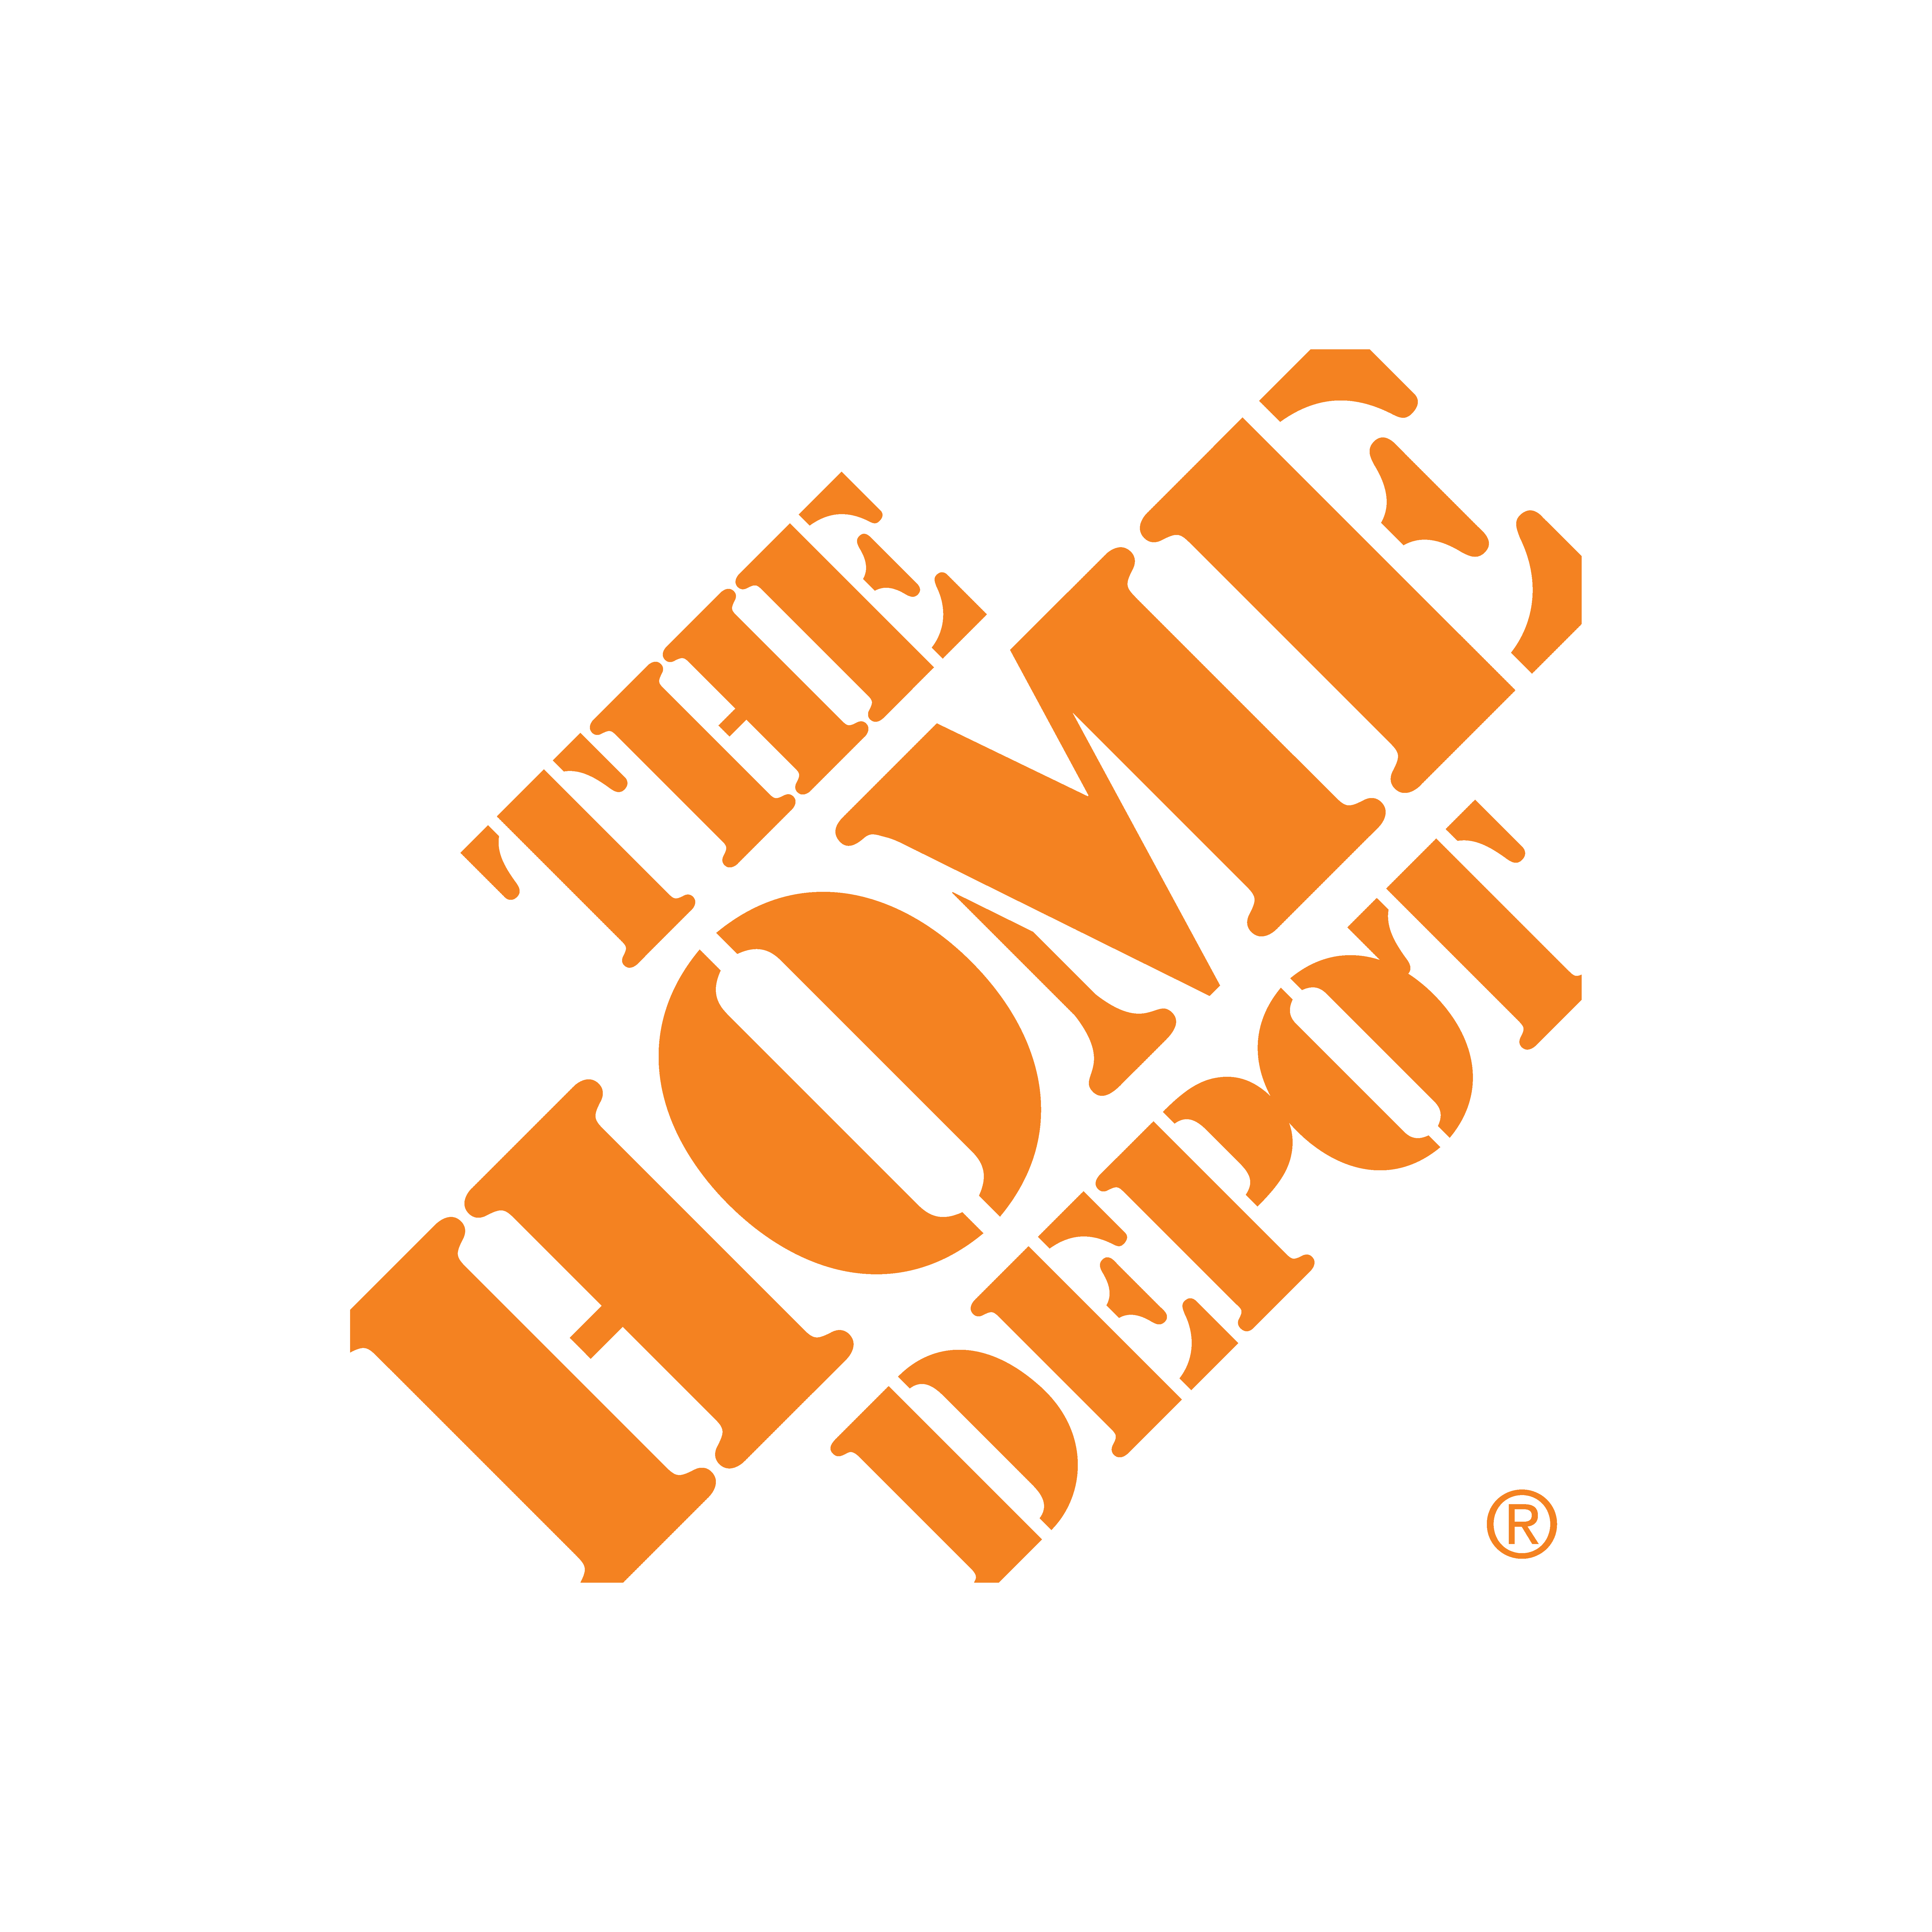 Home Depot Latest Deals - The Krazy Coupon Lady - Free Printable Home Depot Coupons